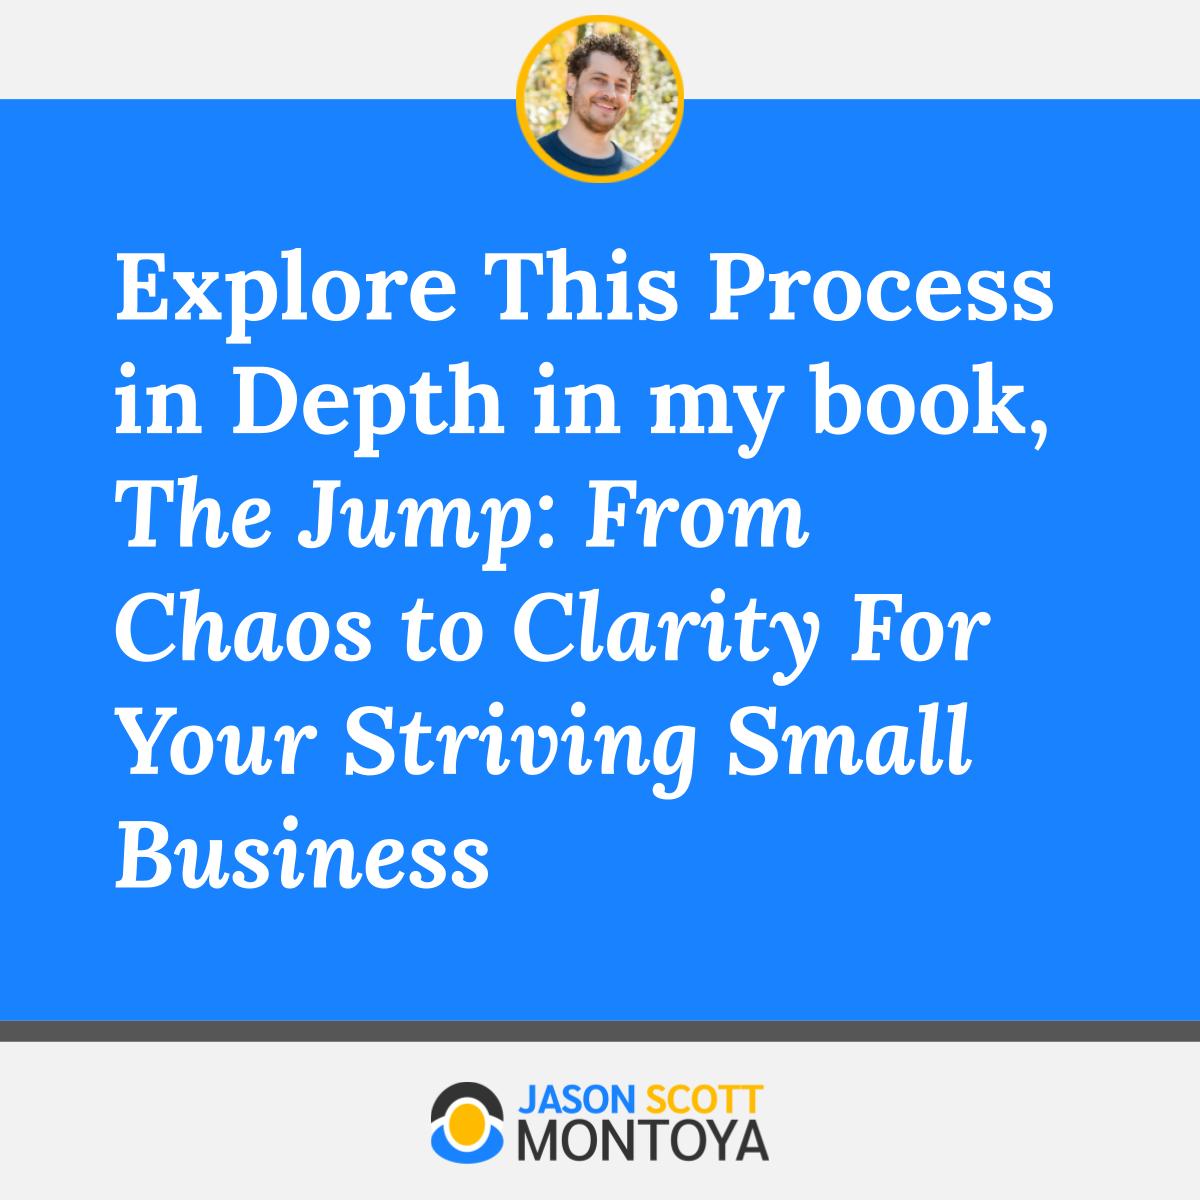 Explore This Process in Depth in my book, The Jump: From Chaos to Clarity For Your Striving Small Business